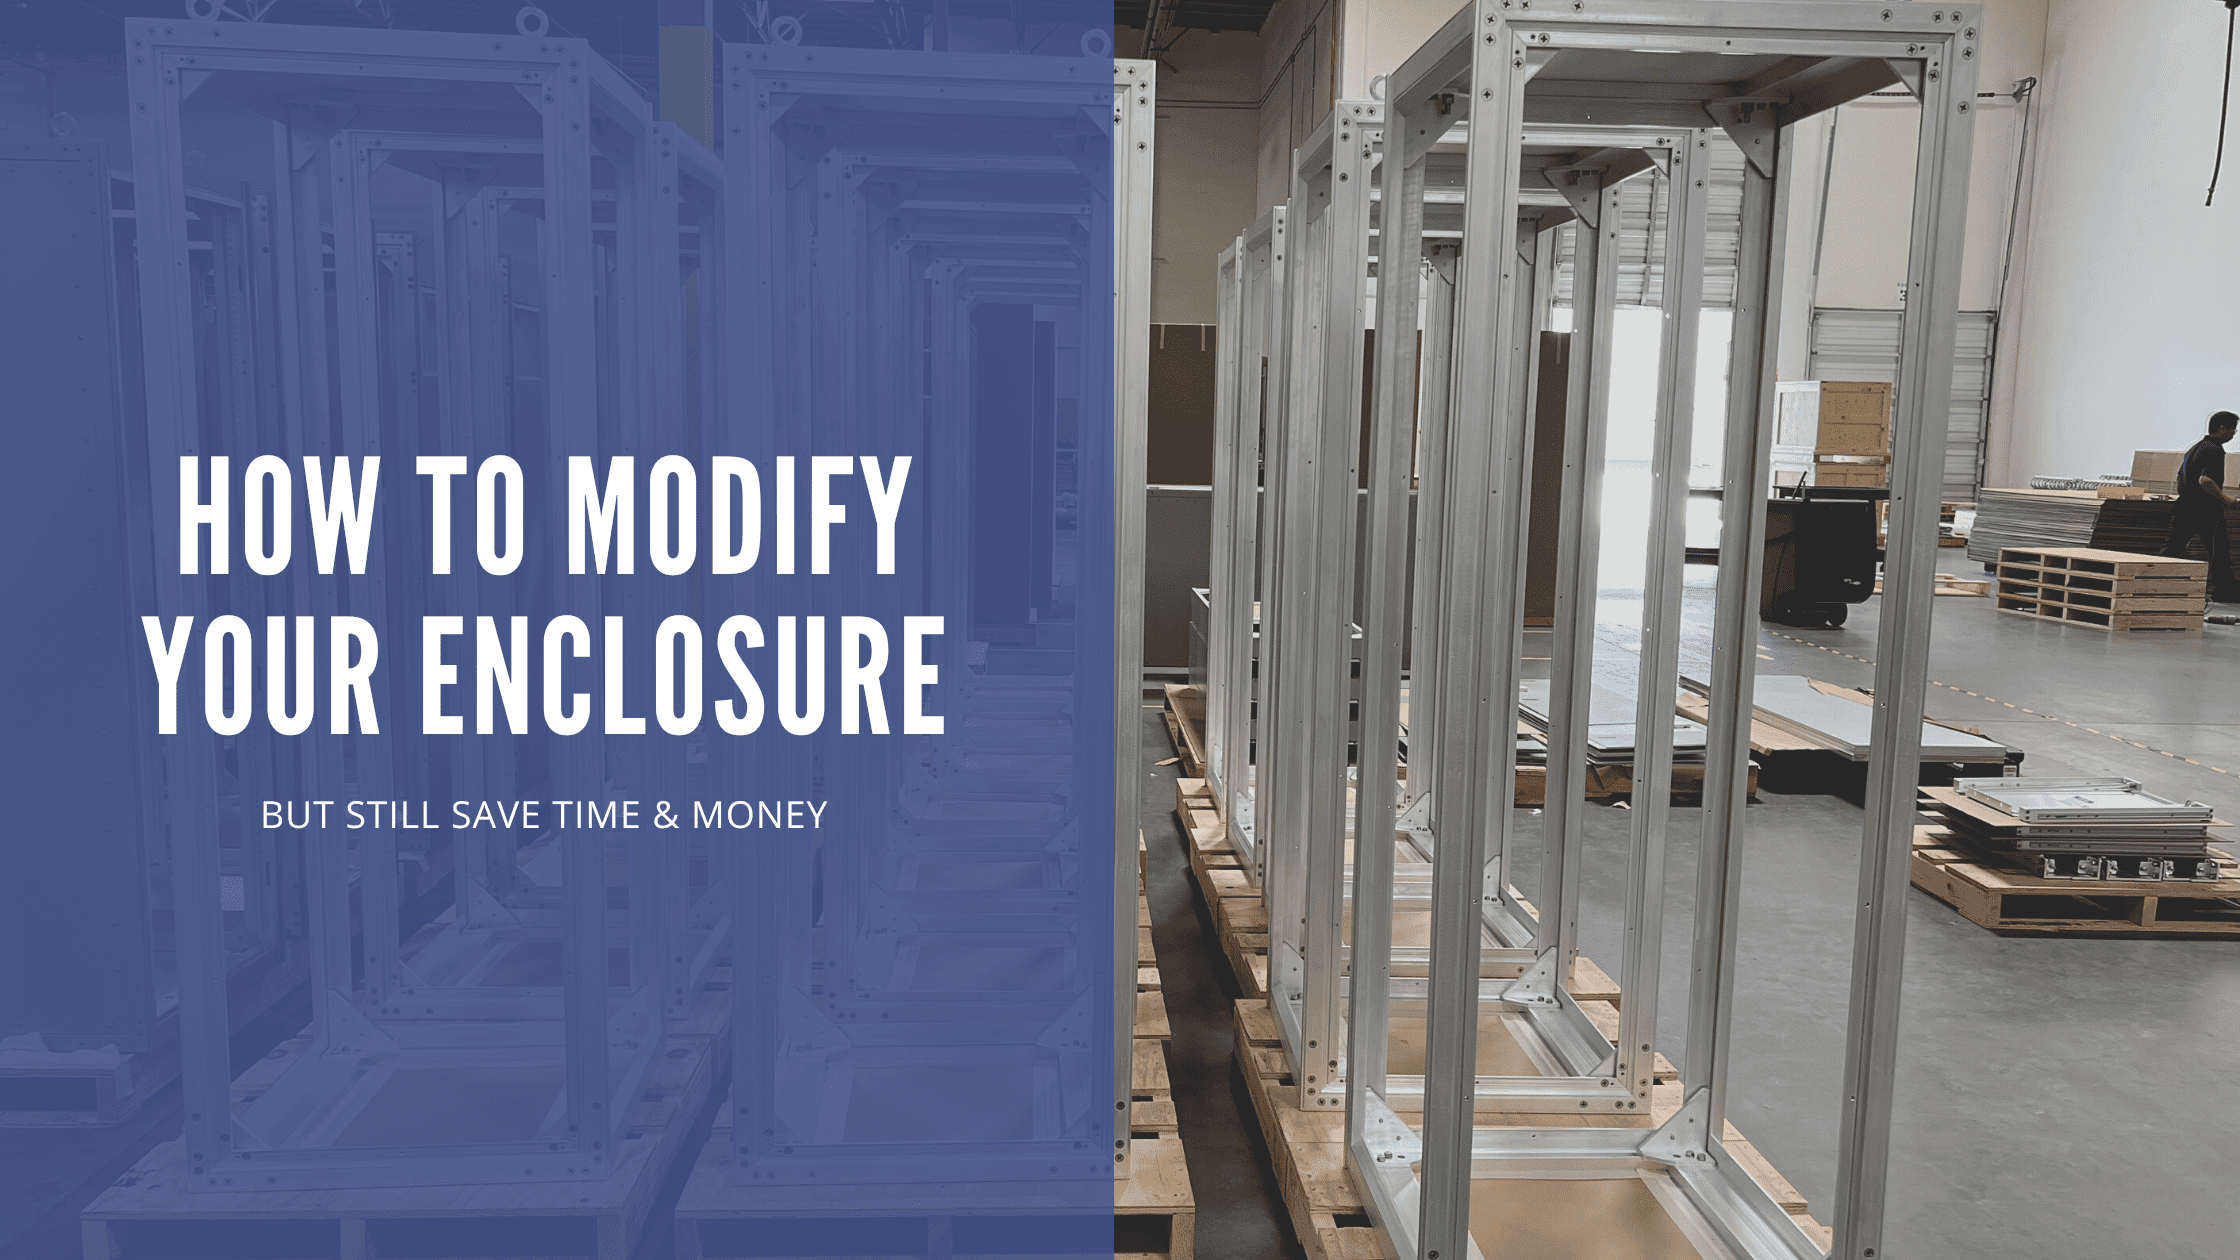 How to Modify your Enclosure, but Still Save Time & Money